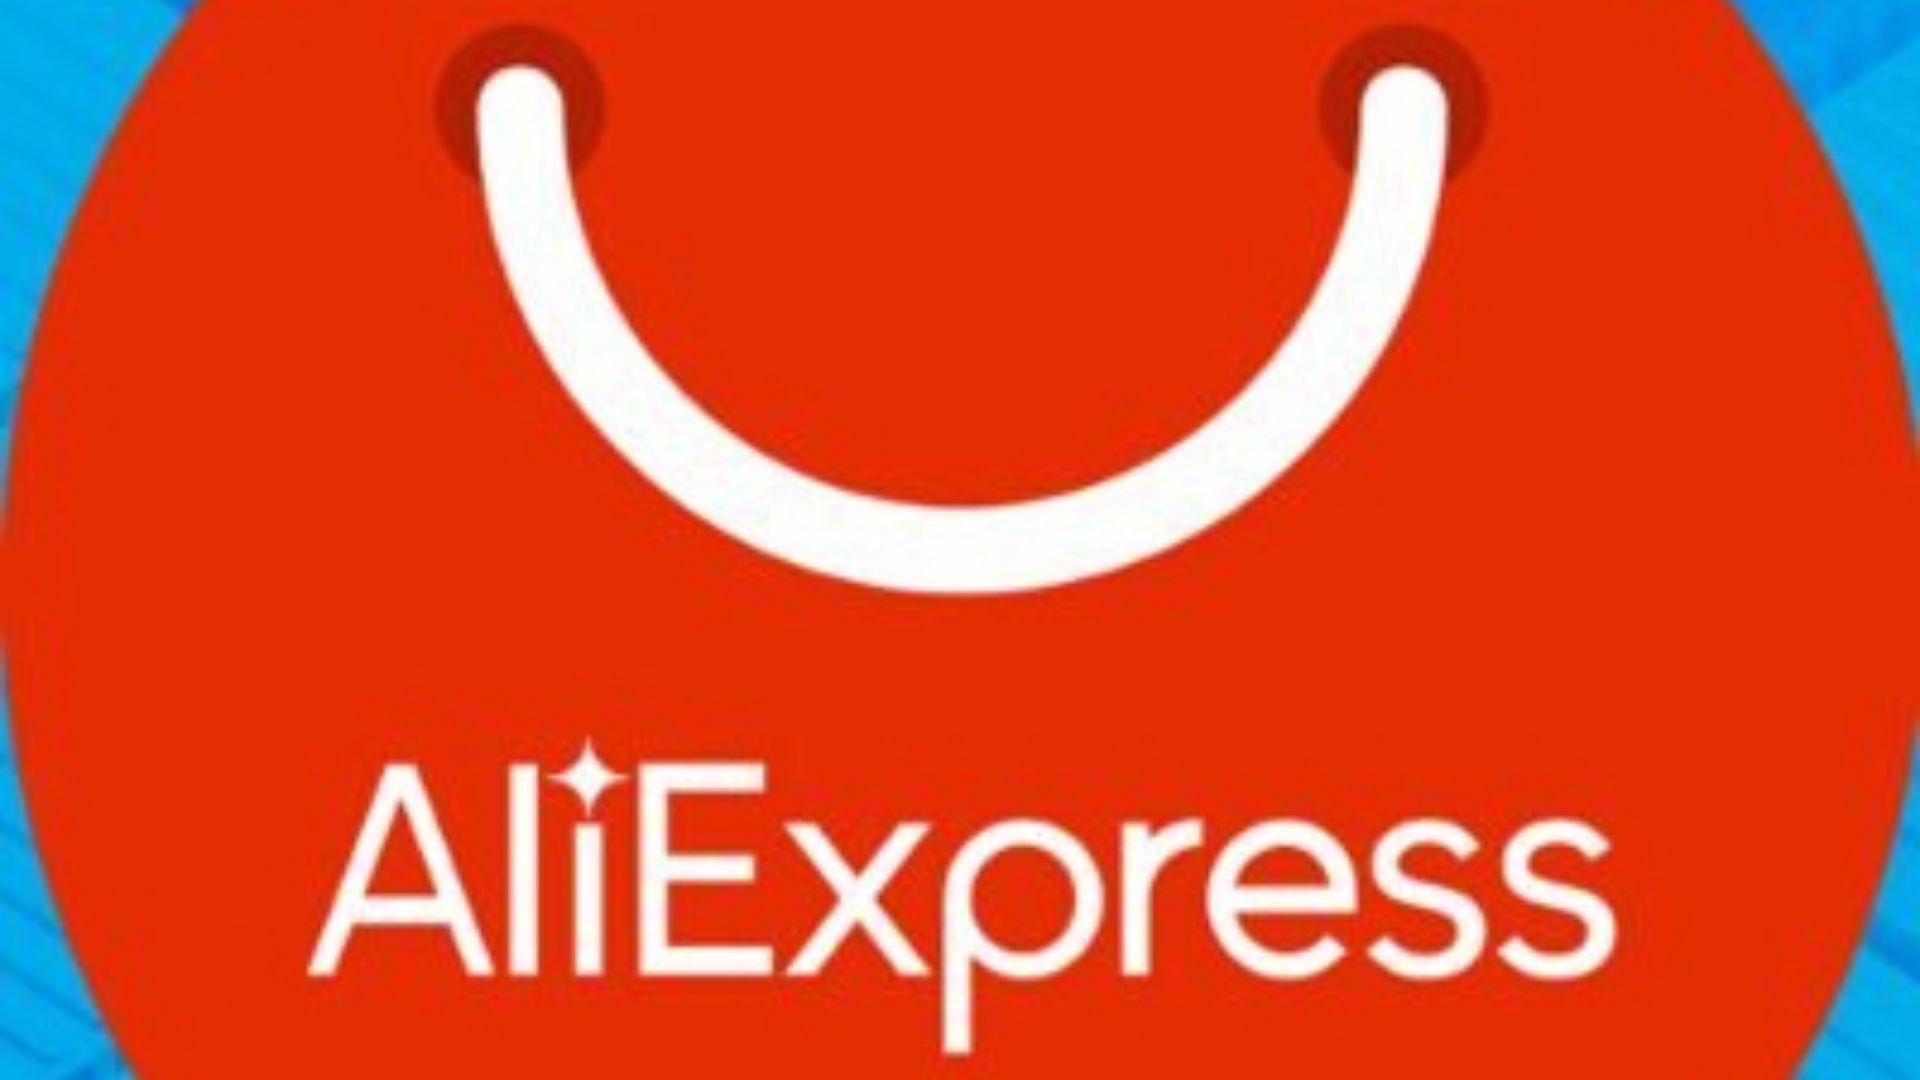 buy from AliExpress and ship to Ghana